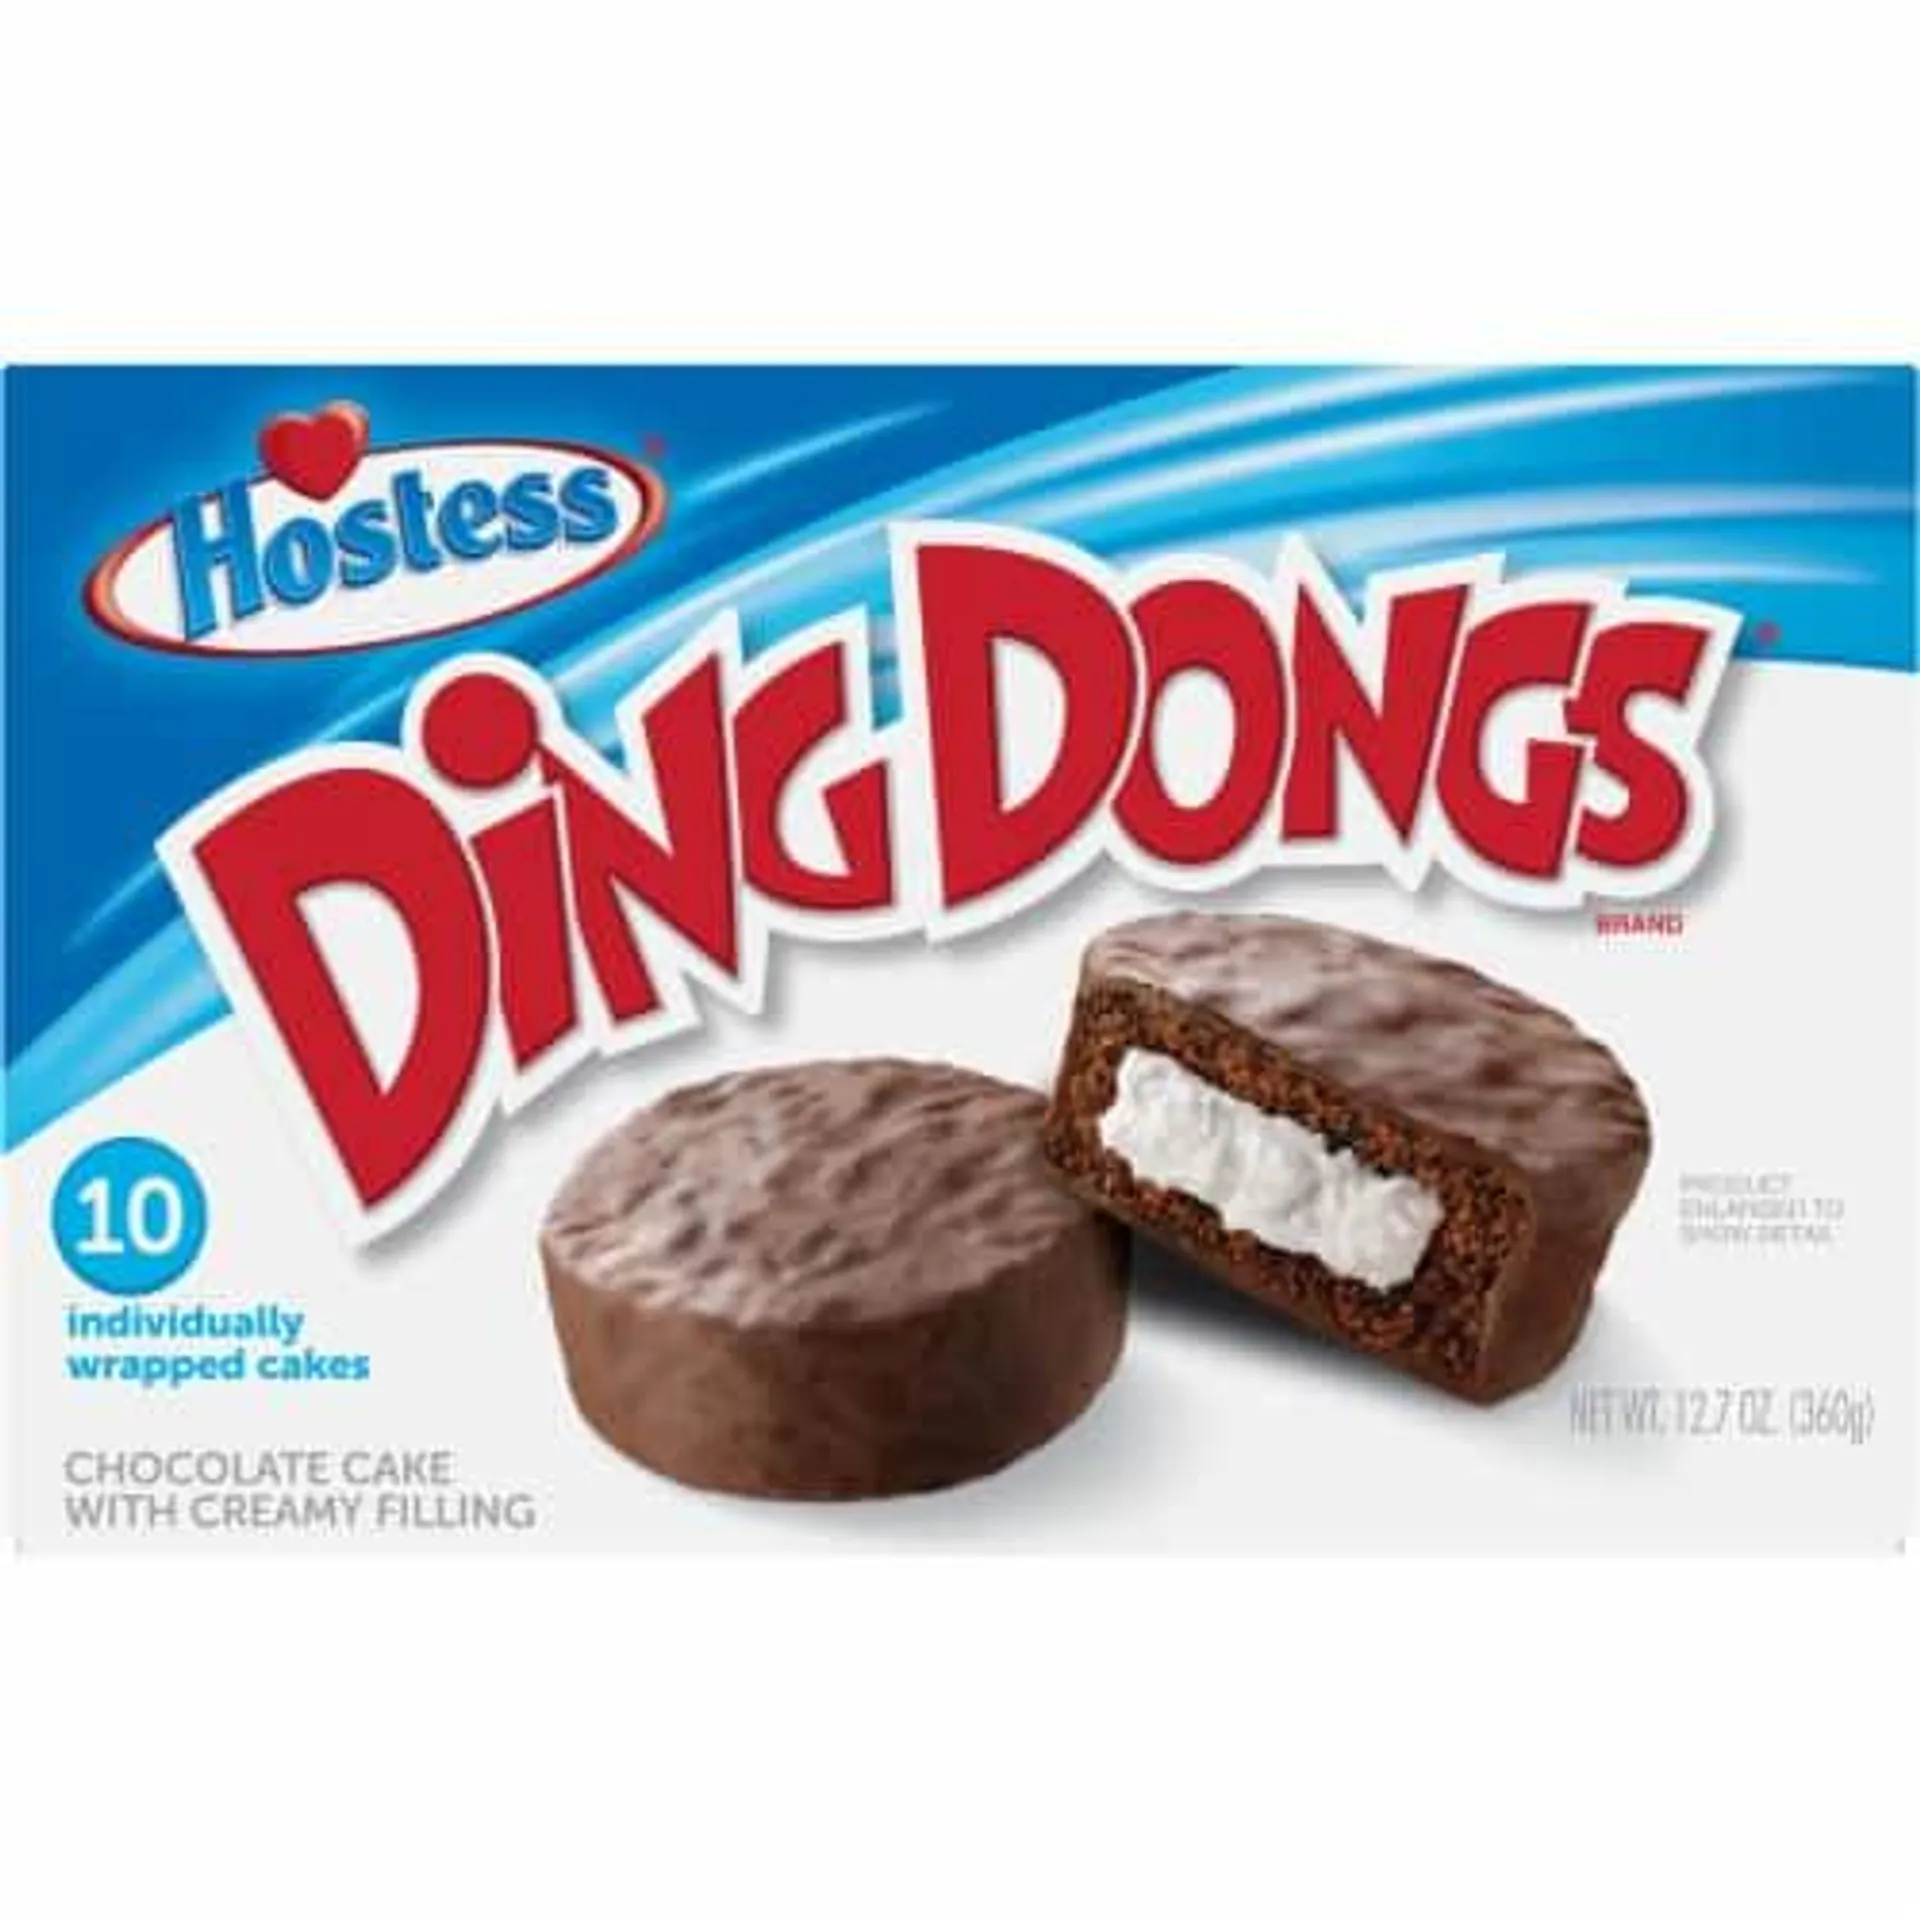 HOSTESS Chocolate DING DONGS, Creamy Filling, Individually Wrapped